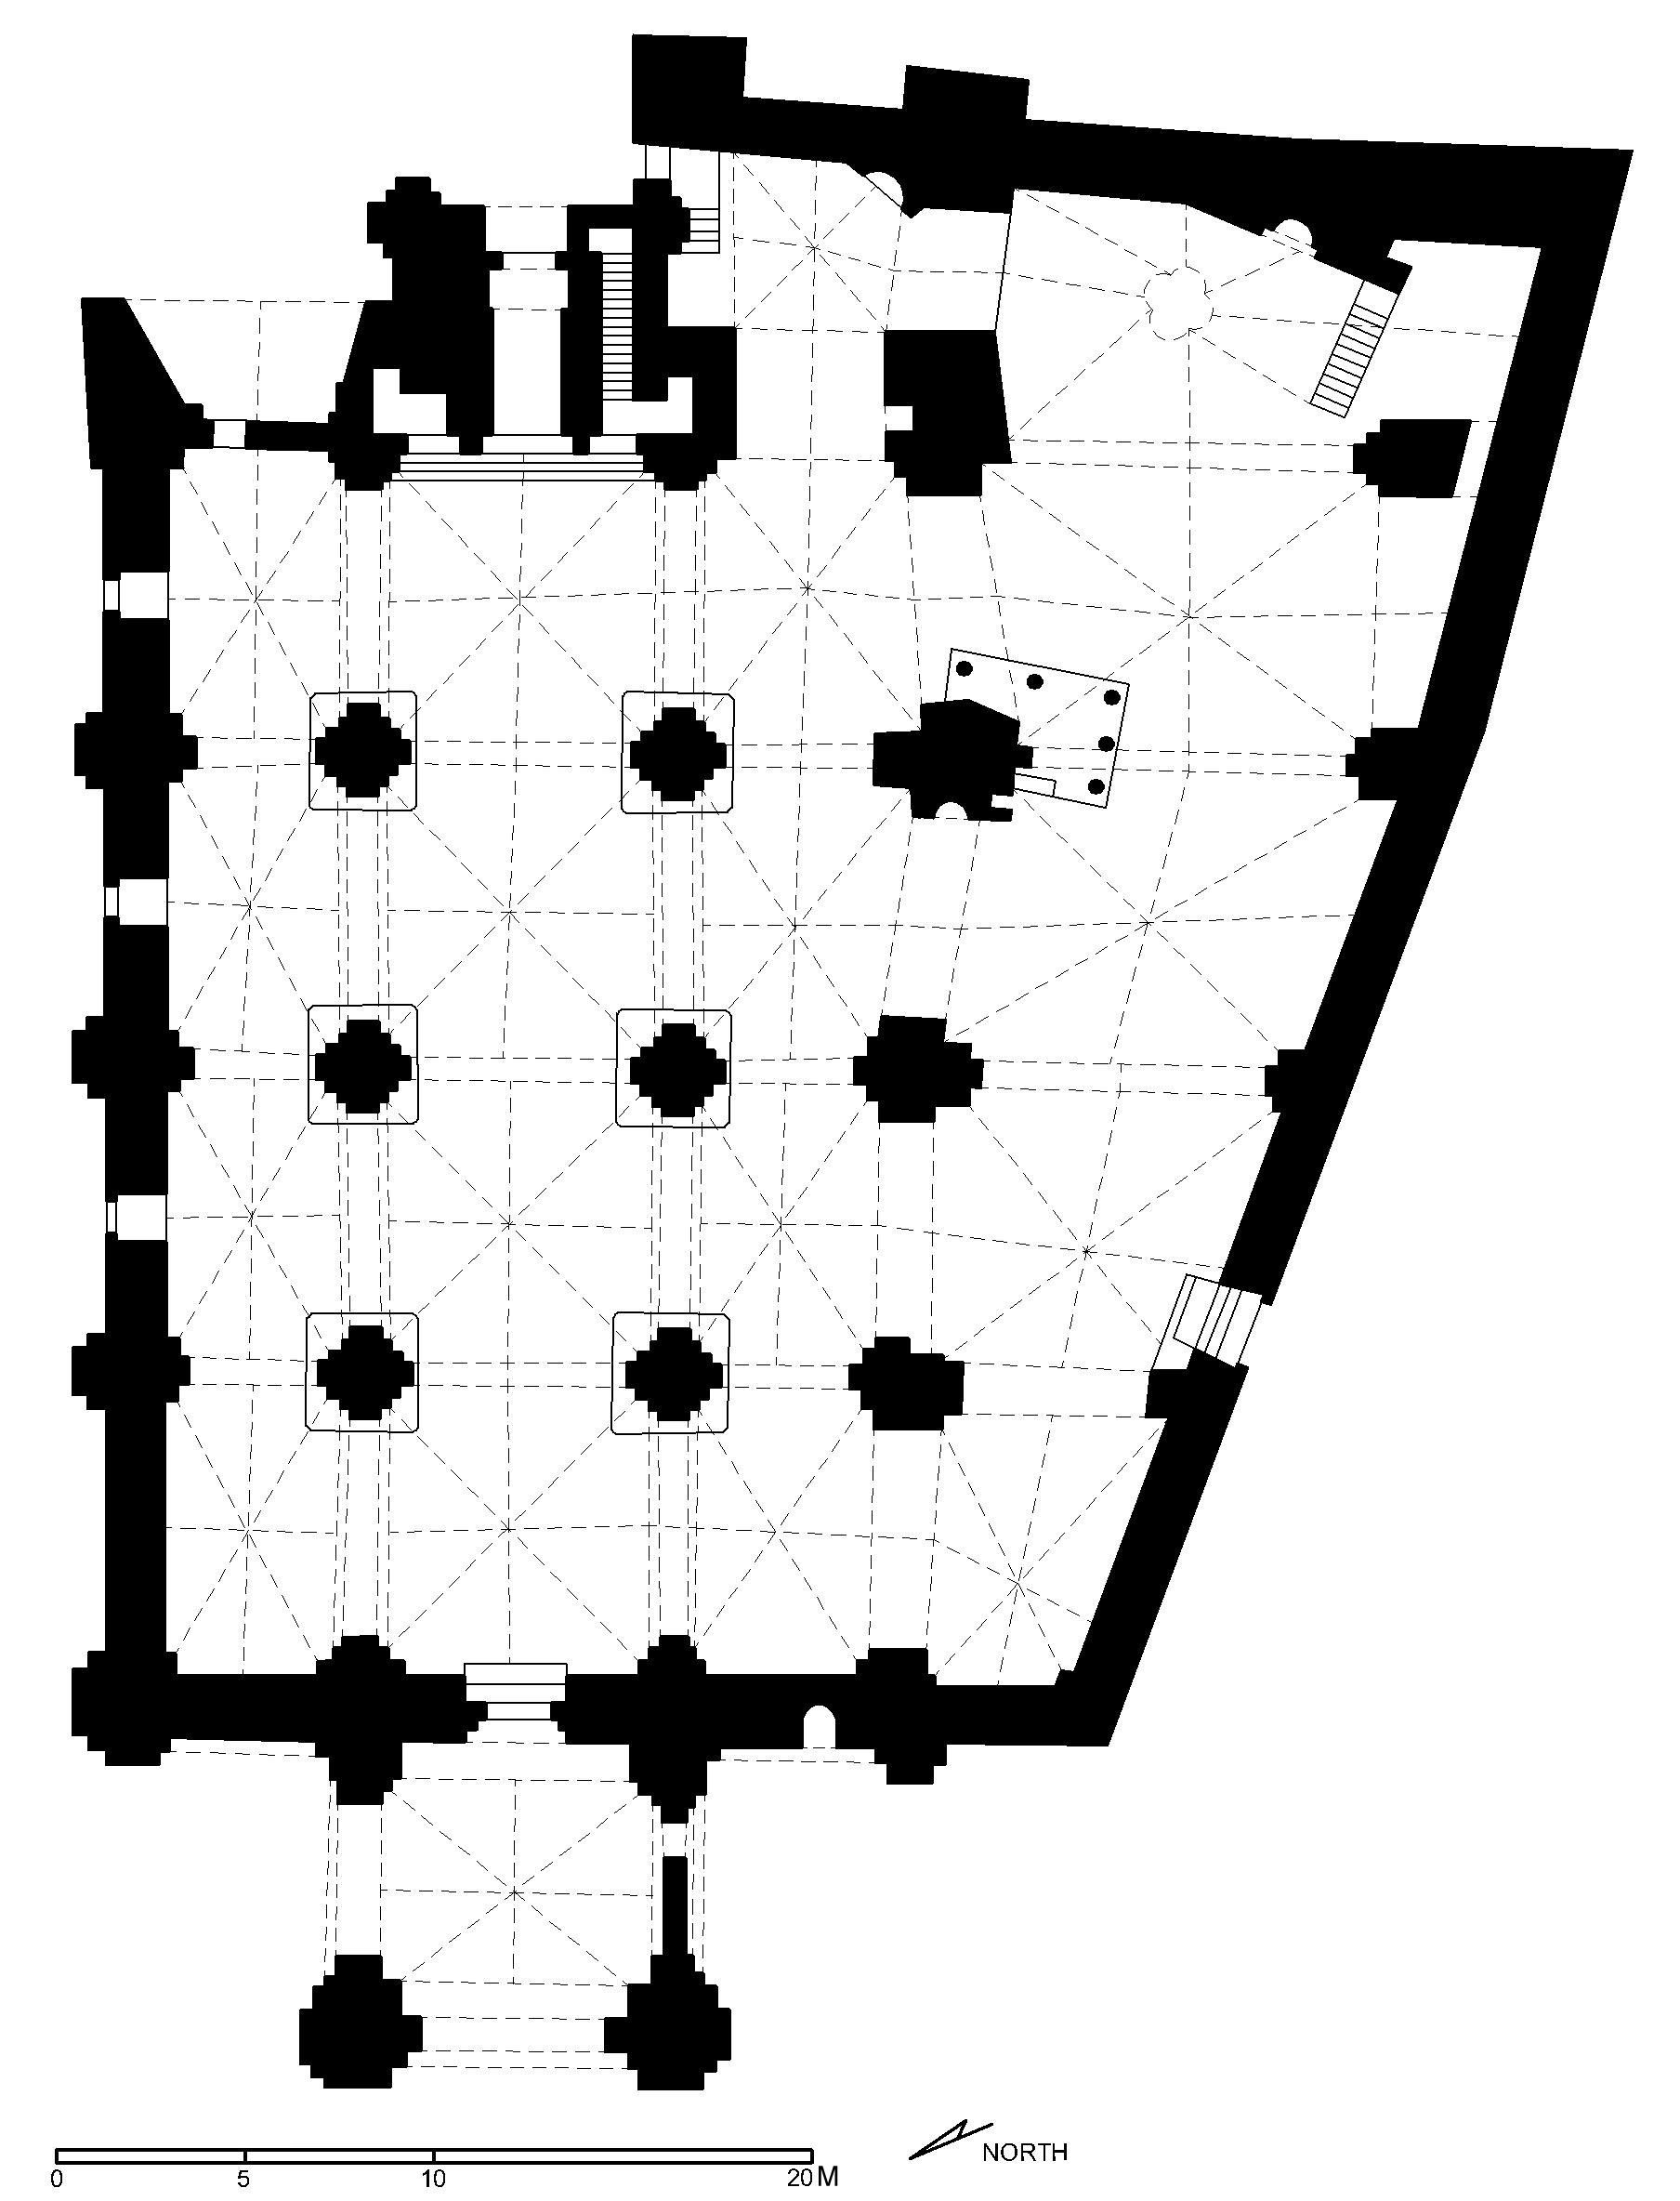 Floor plan of mosque. Dark shaded walls were adapted from a Crusader church on the site (after Meinecke)